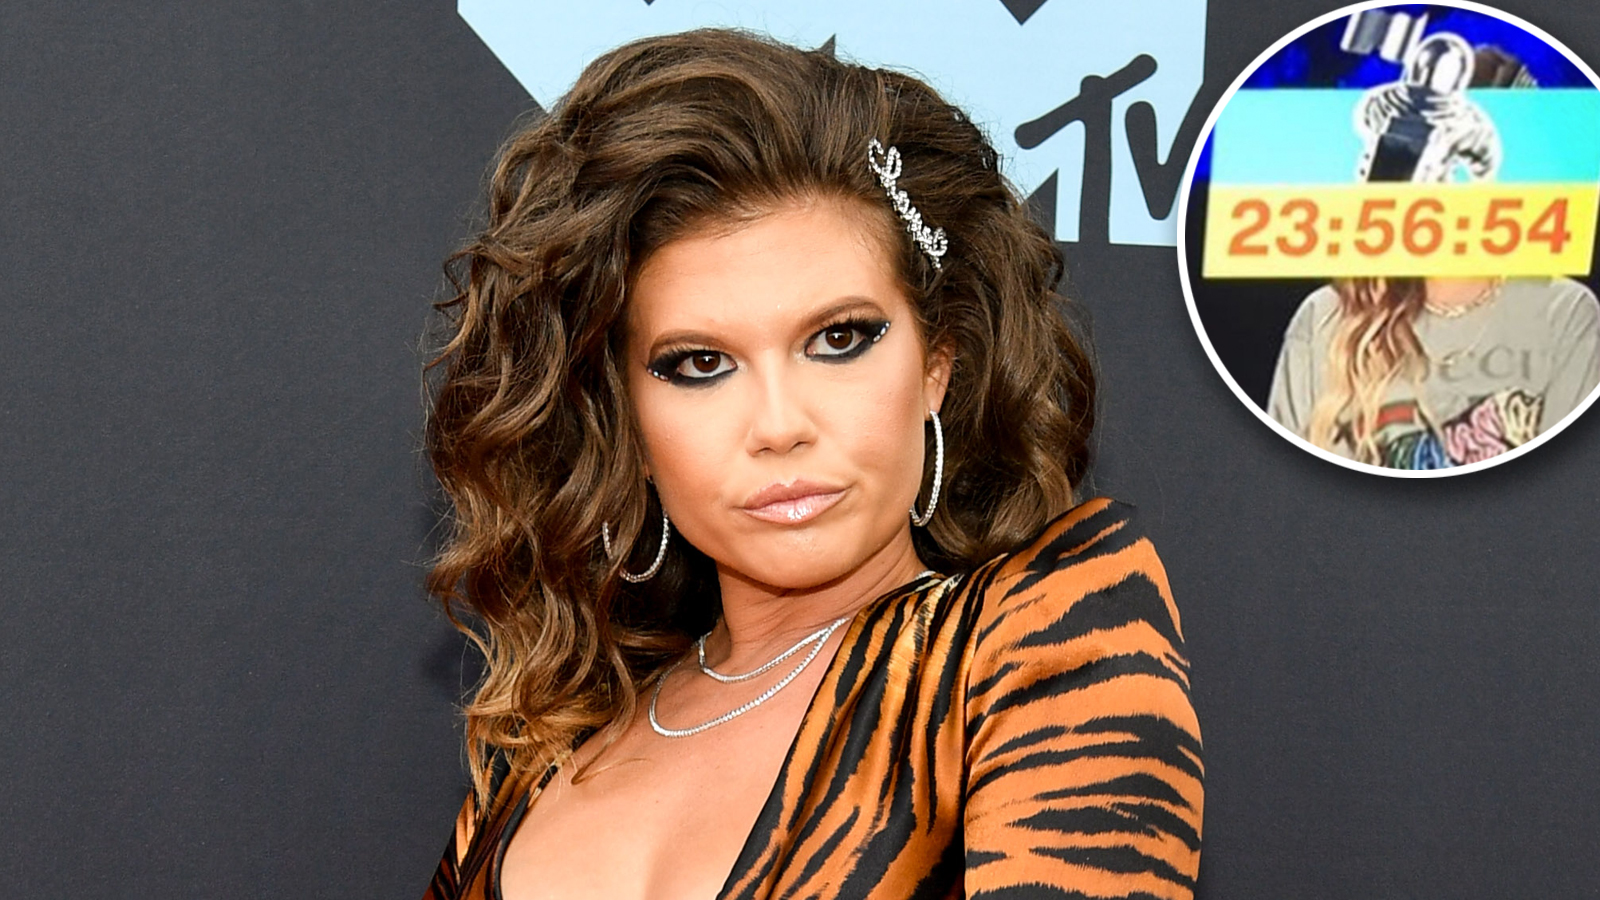 Chanel West Coast Calls Out MTV for Blocking Her Face With an Ad